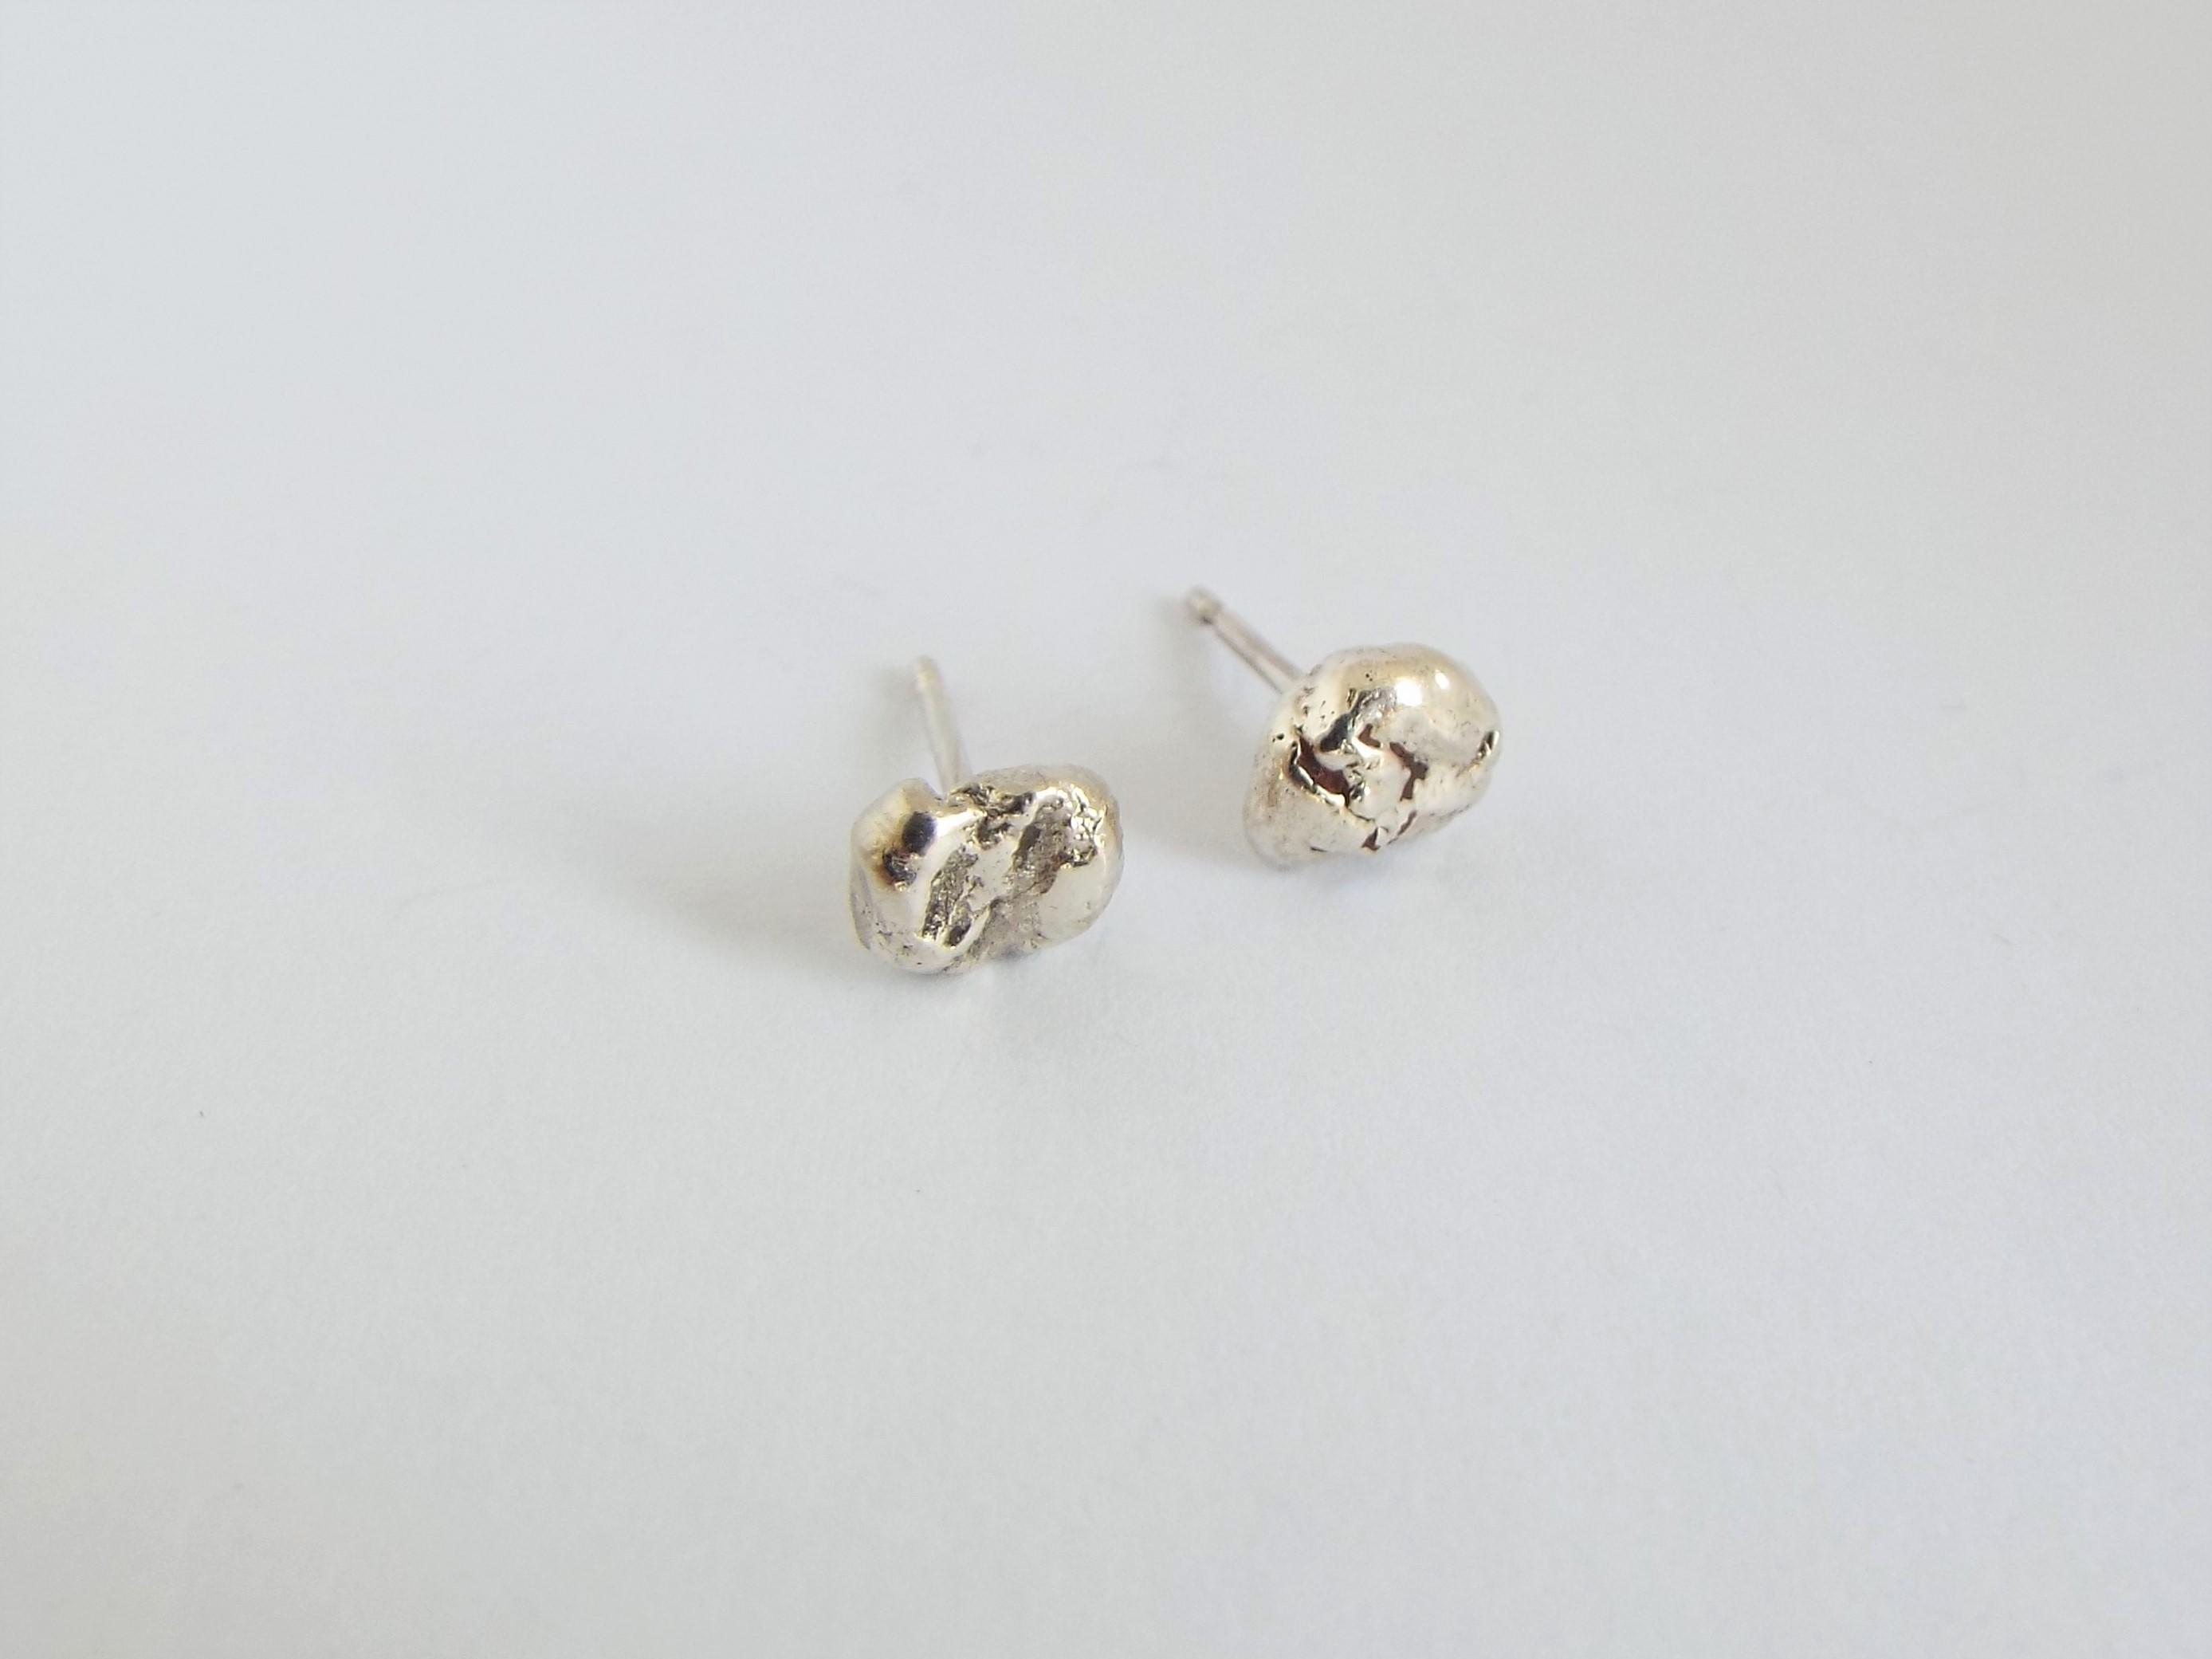 recyled sterling silver textured stud earrings